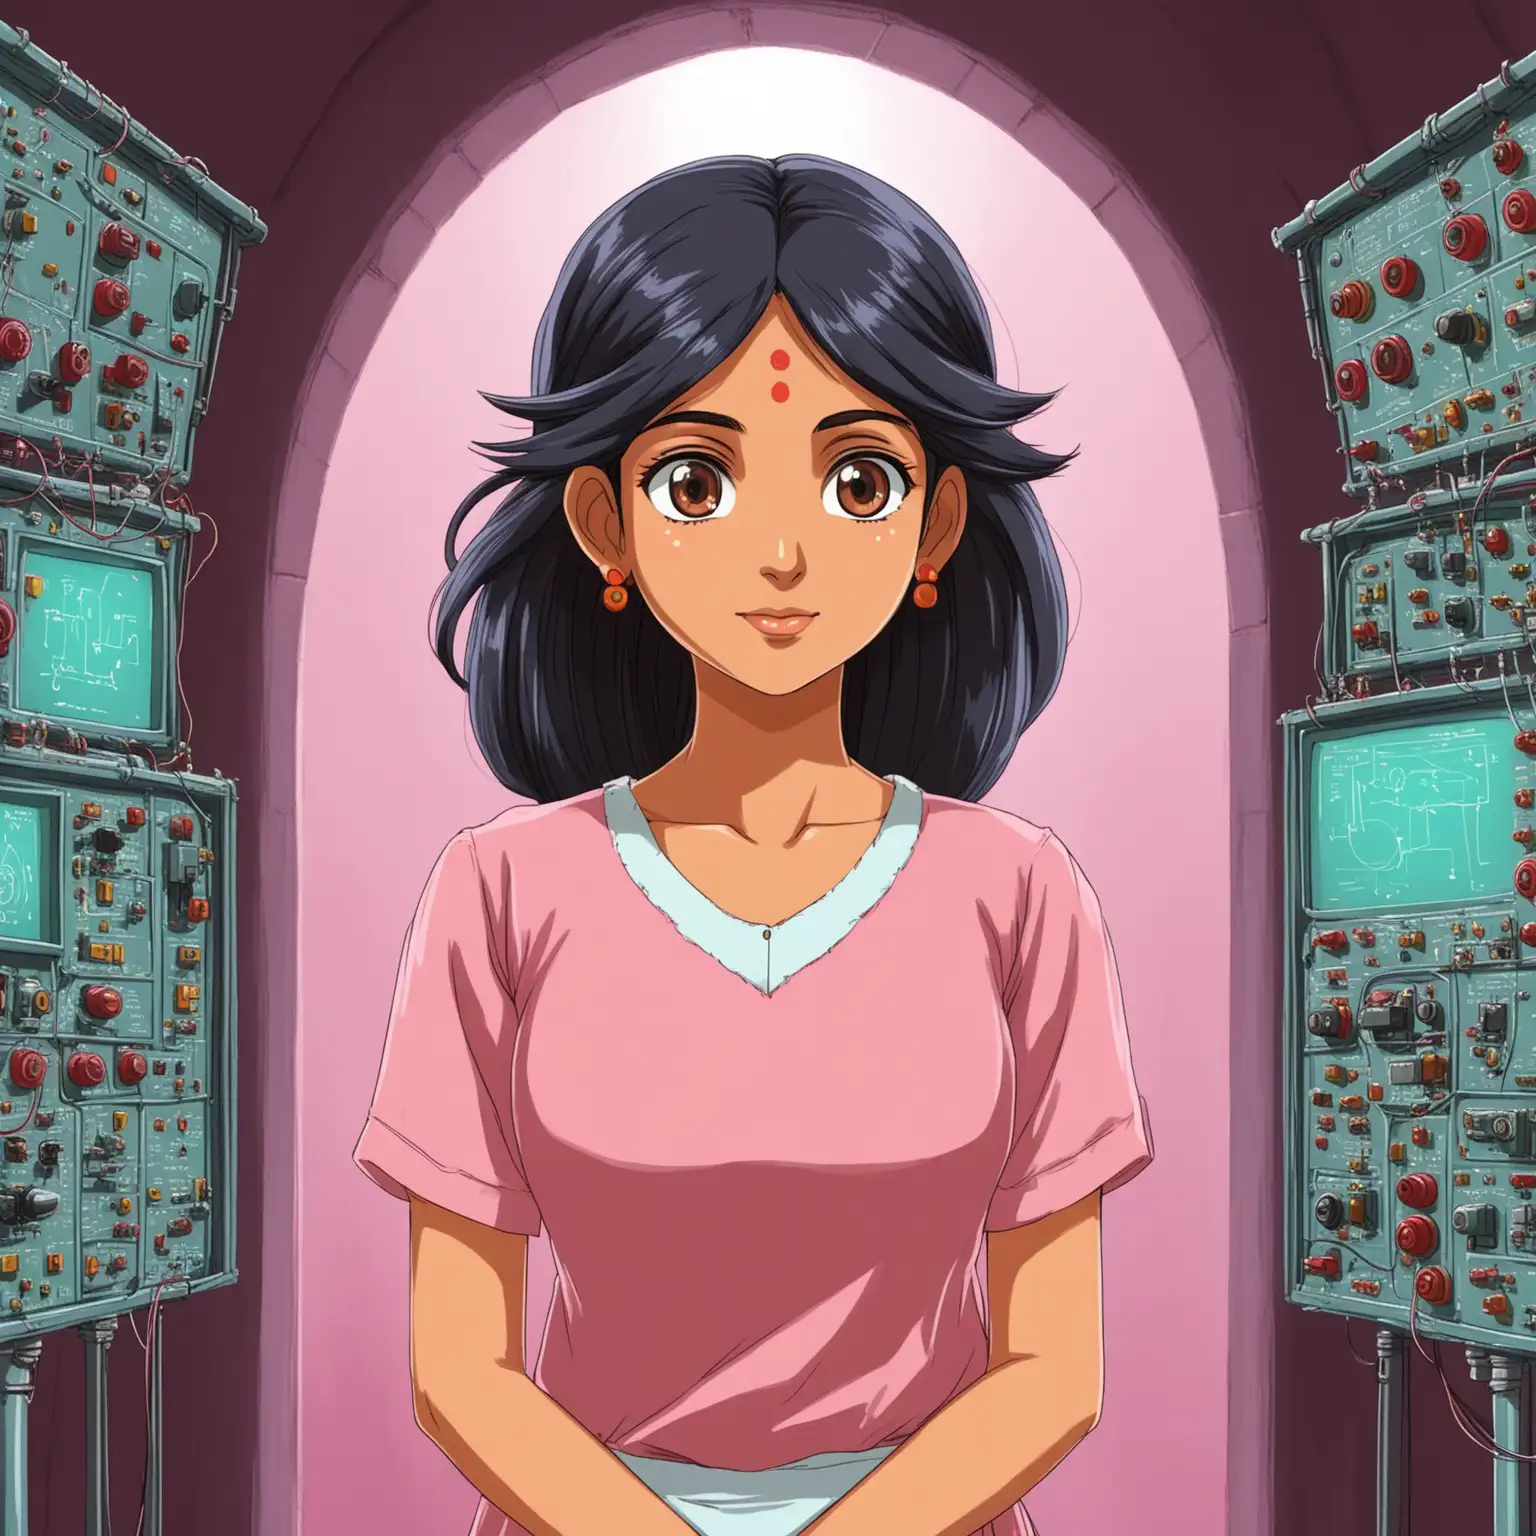 Ghibli Anime Style Pretty Indian Electrical Engineer in Pink Theme